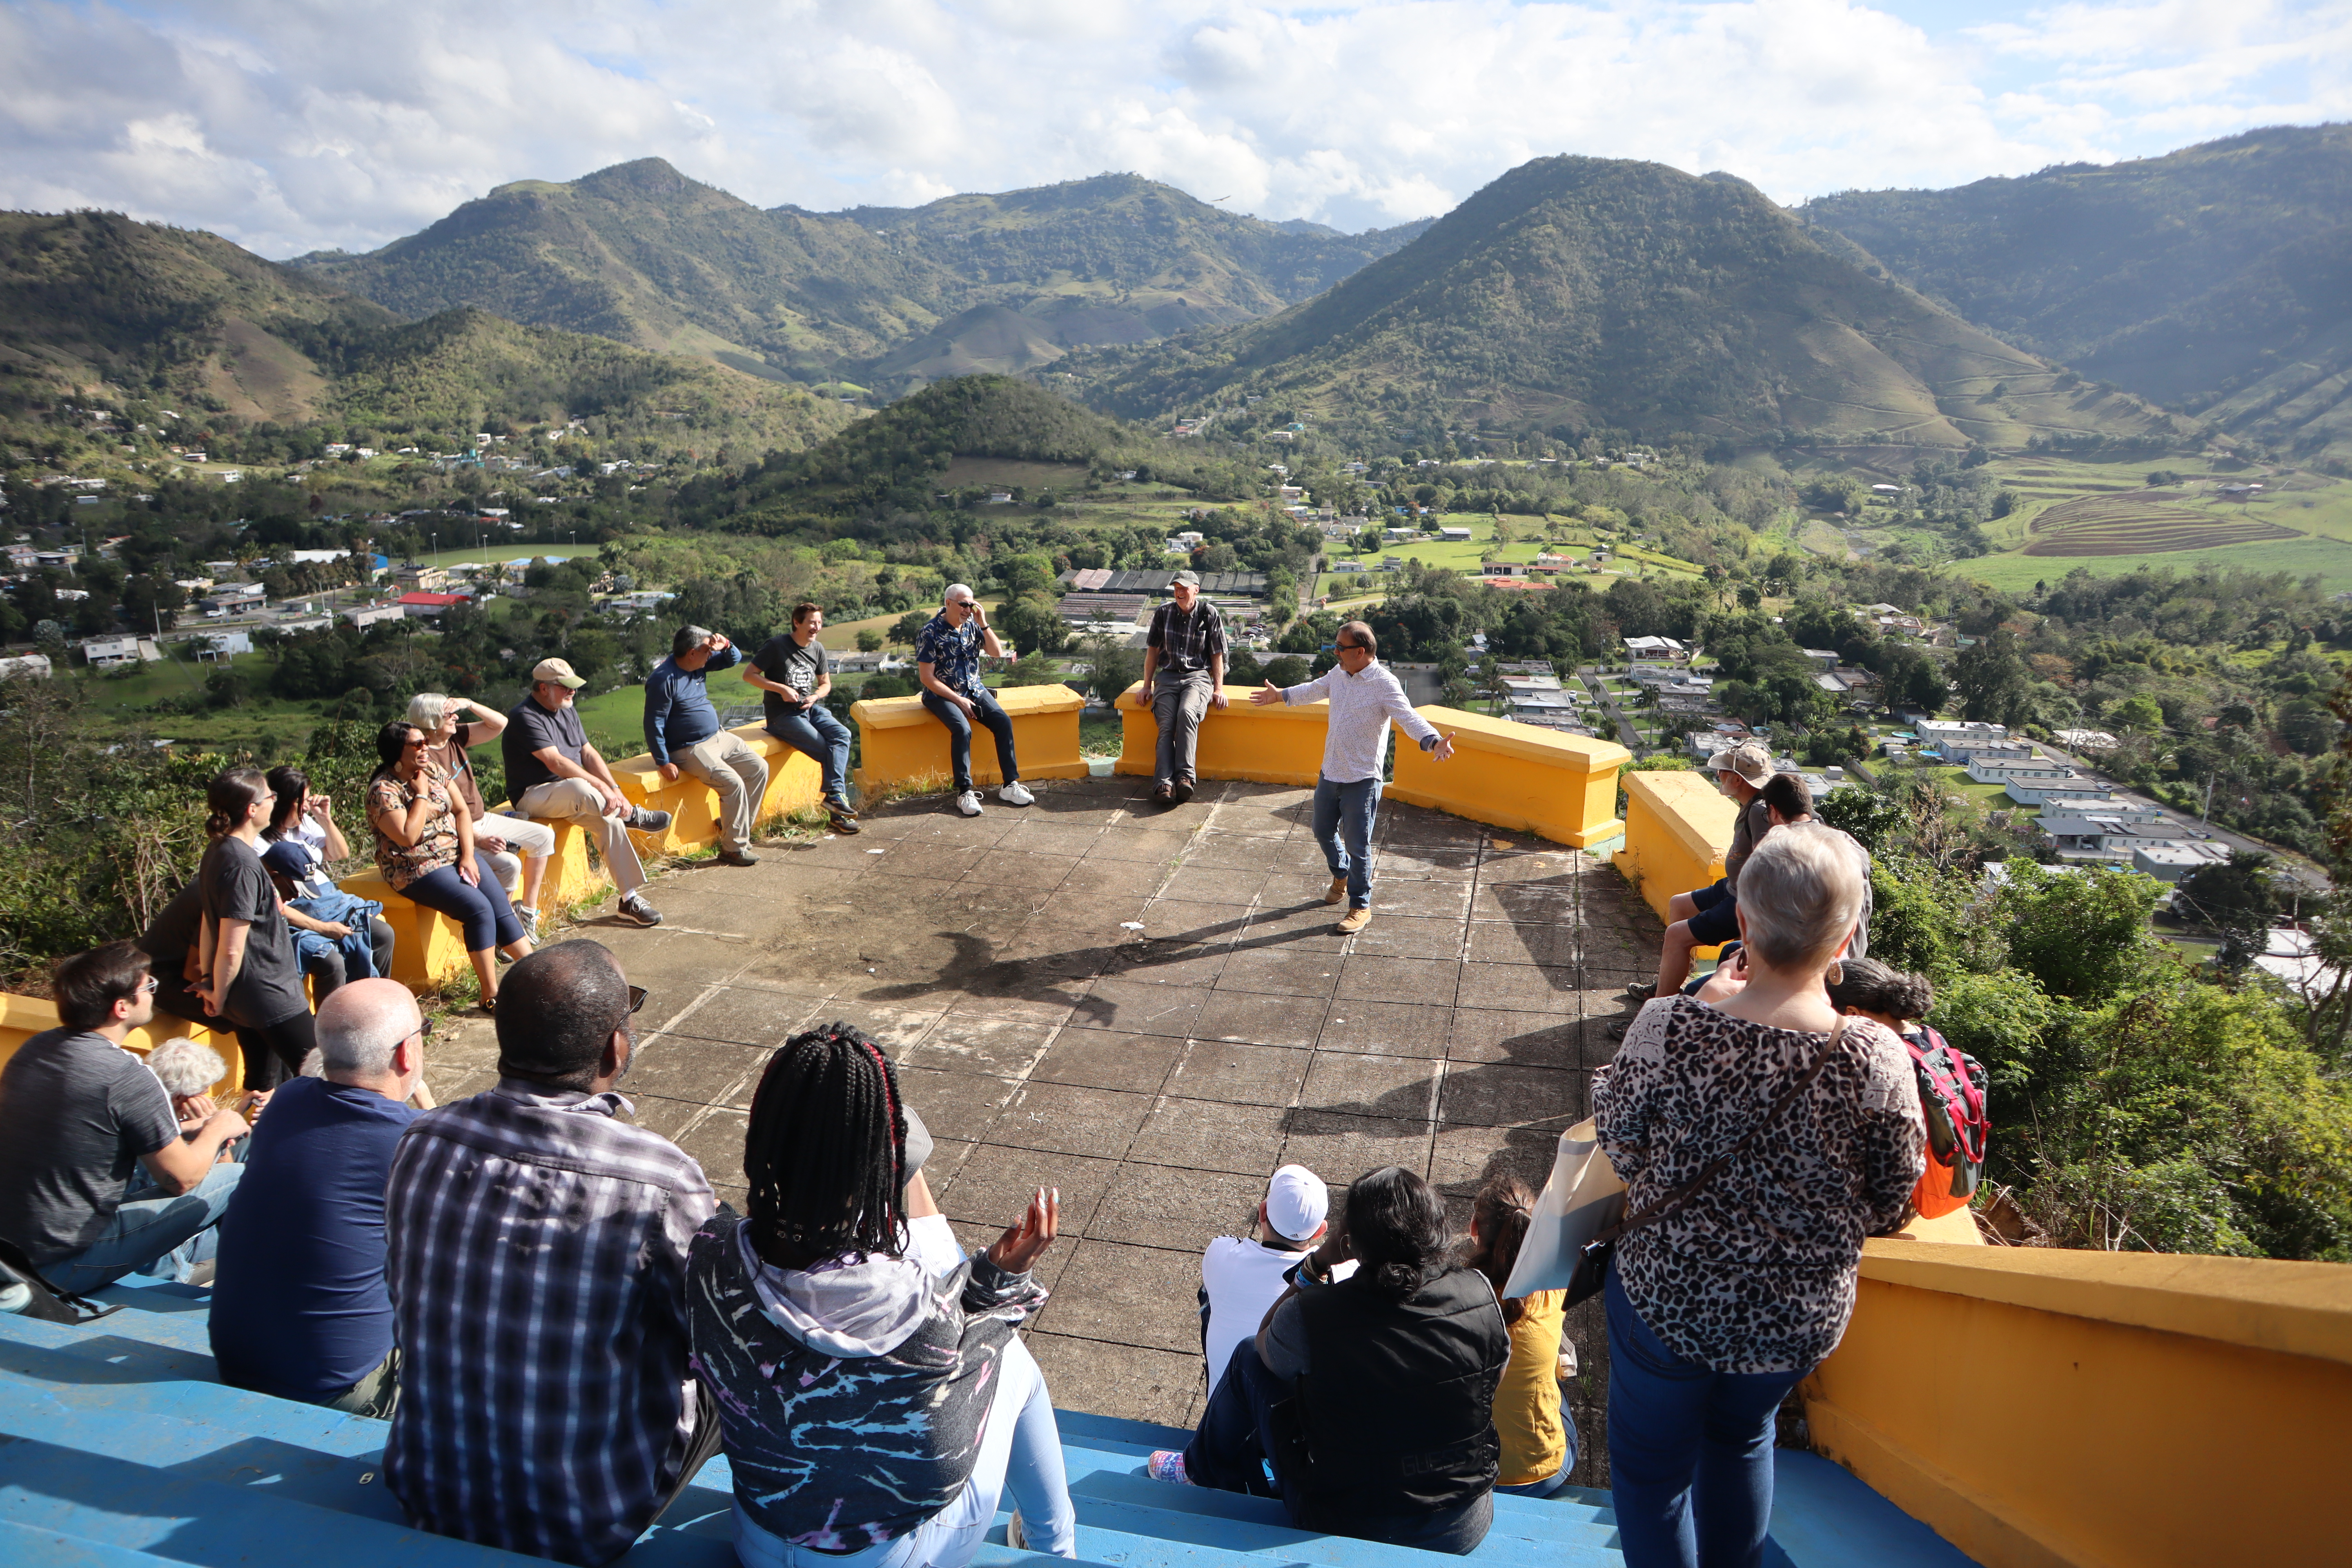 A group of people sitting in a circle listening to a speaker surrounded by grassy hills